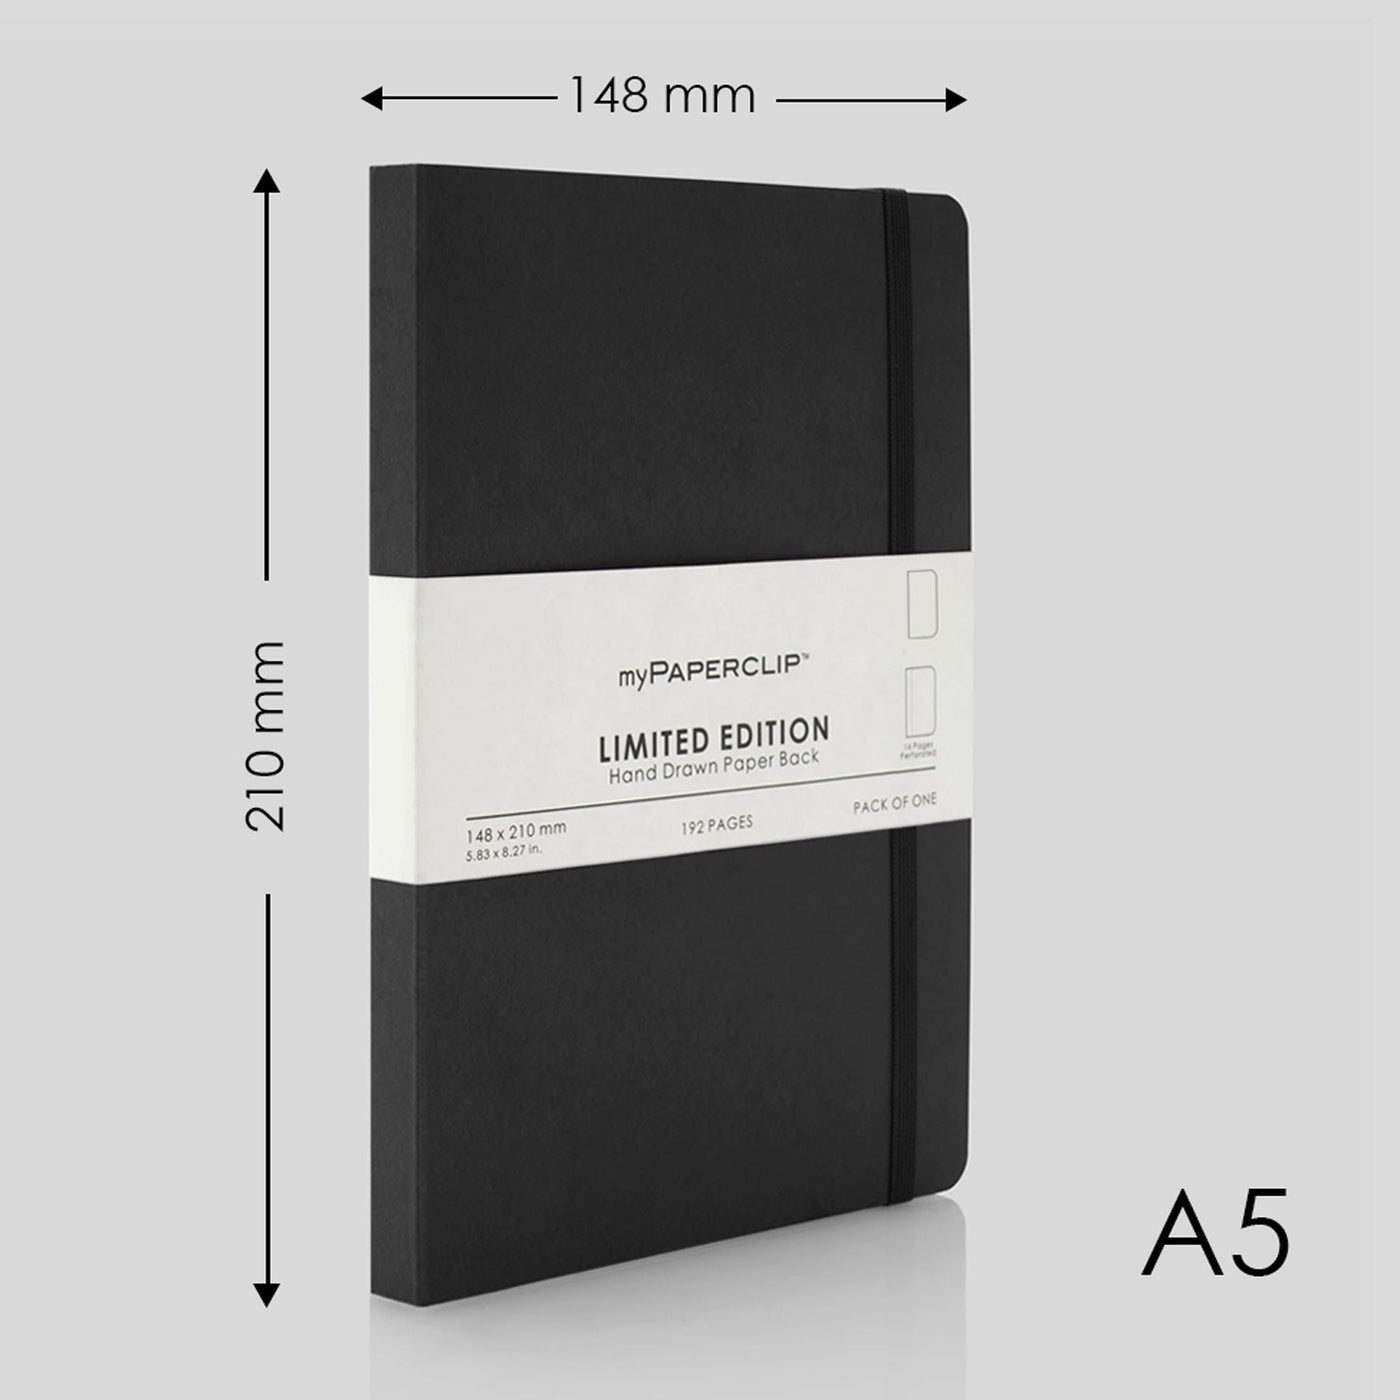 myPAPERCLIP Limited Edition Soft Cover Notebook - Black - A5 - Plain 2